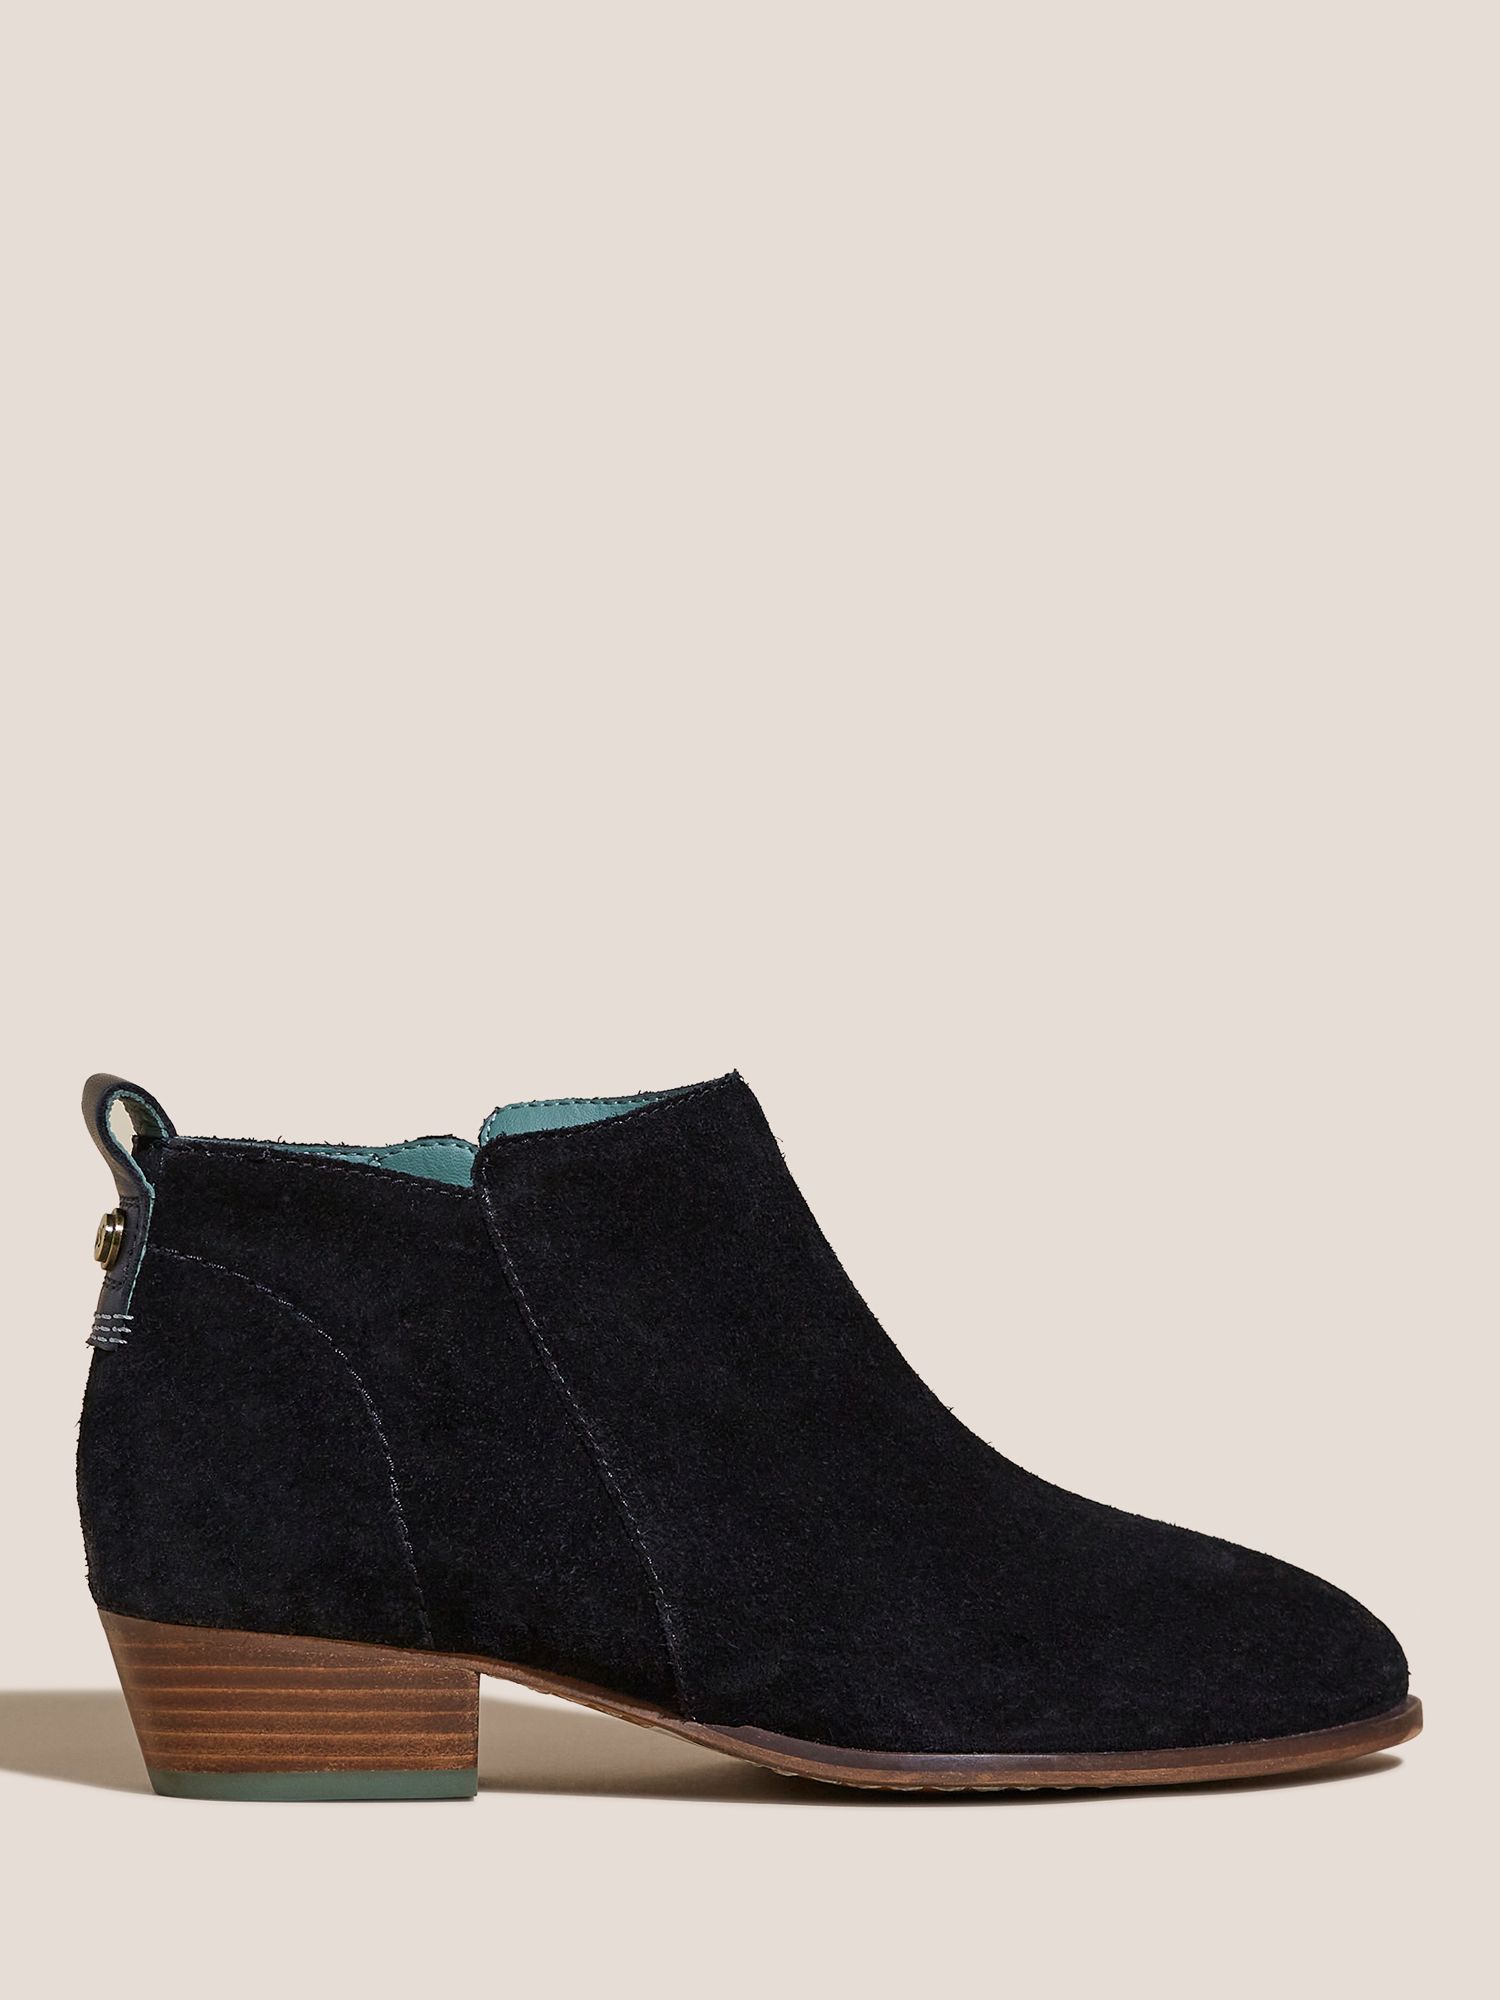 White Stuff Willow Suede Shoe Boots, Pure Black at John Lewis & Partners